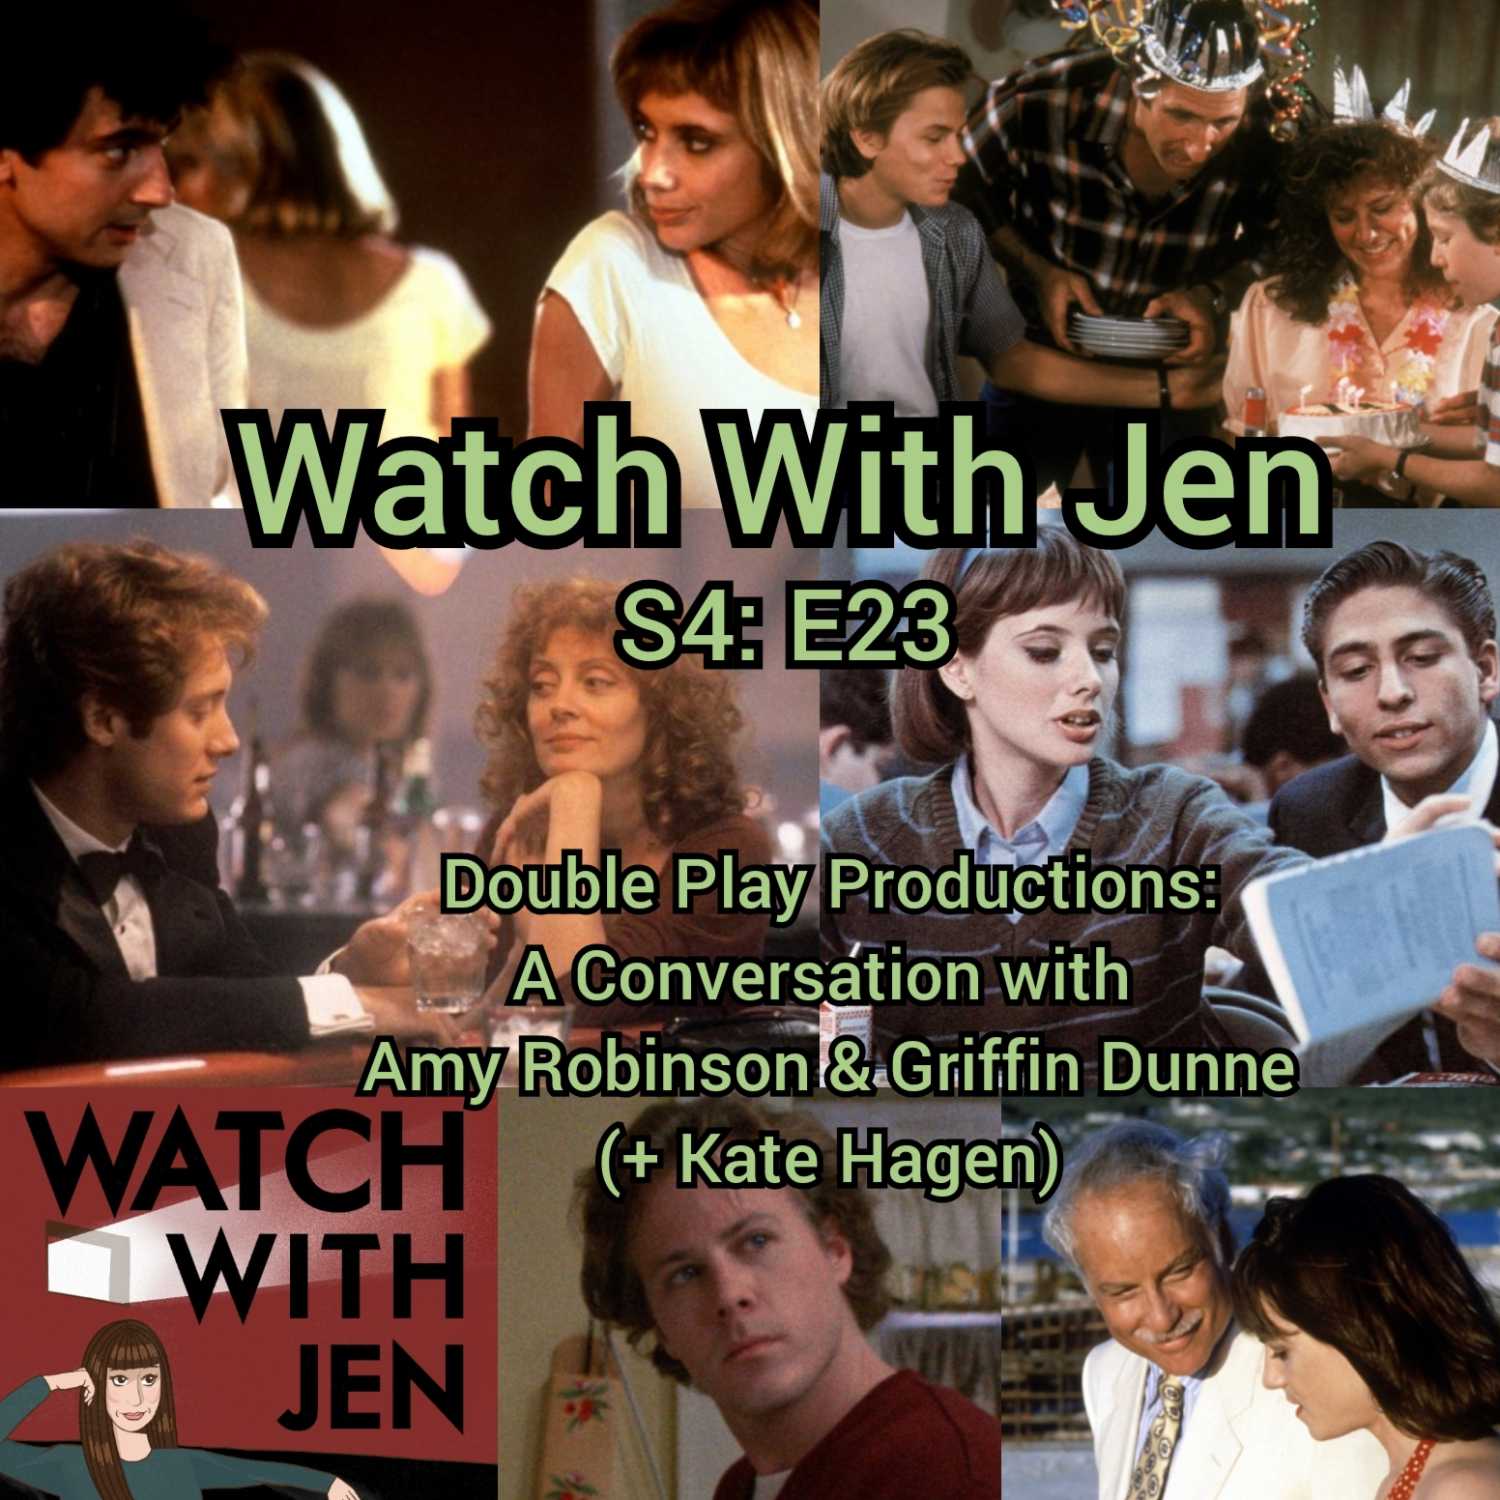 Watch With Jen - S4: E23 - Double Play Productions: A Conversation with Amy Robinson & Griffin Dunne (+ Kate Hagen)